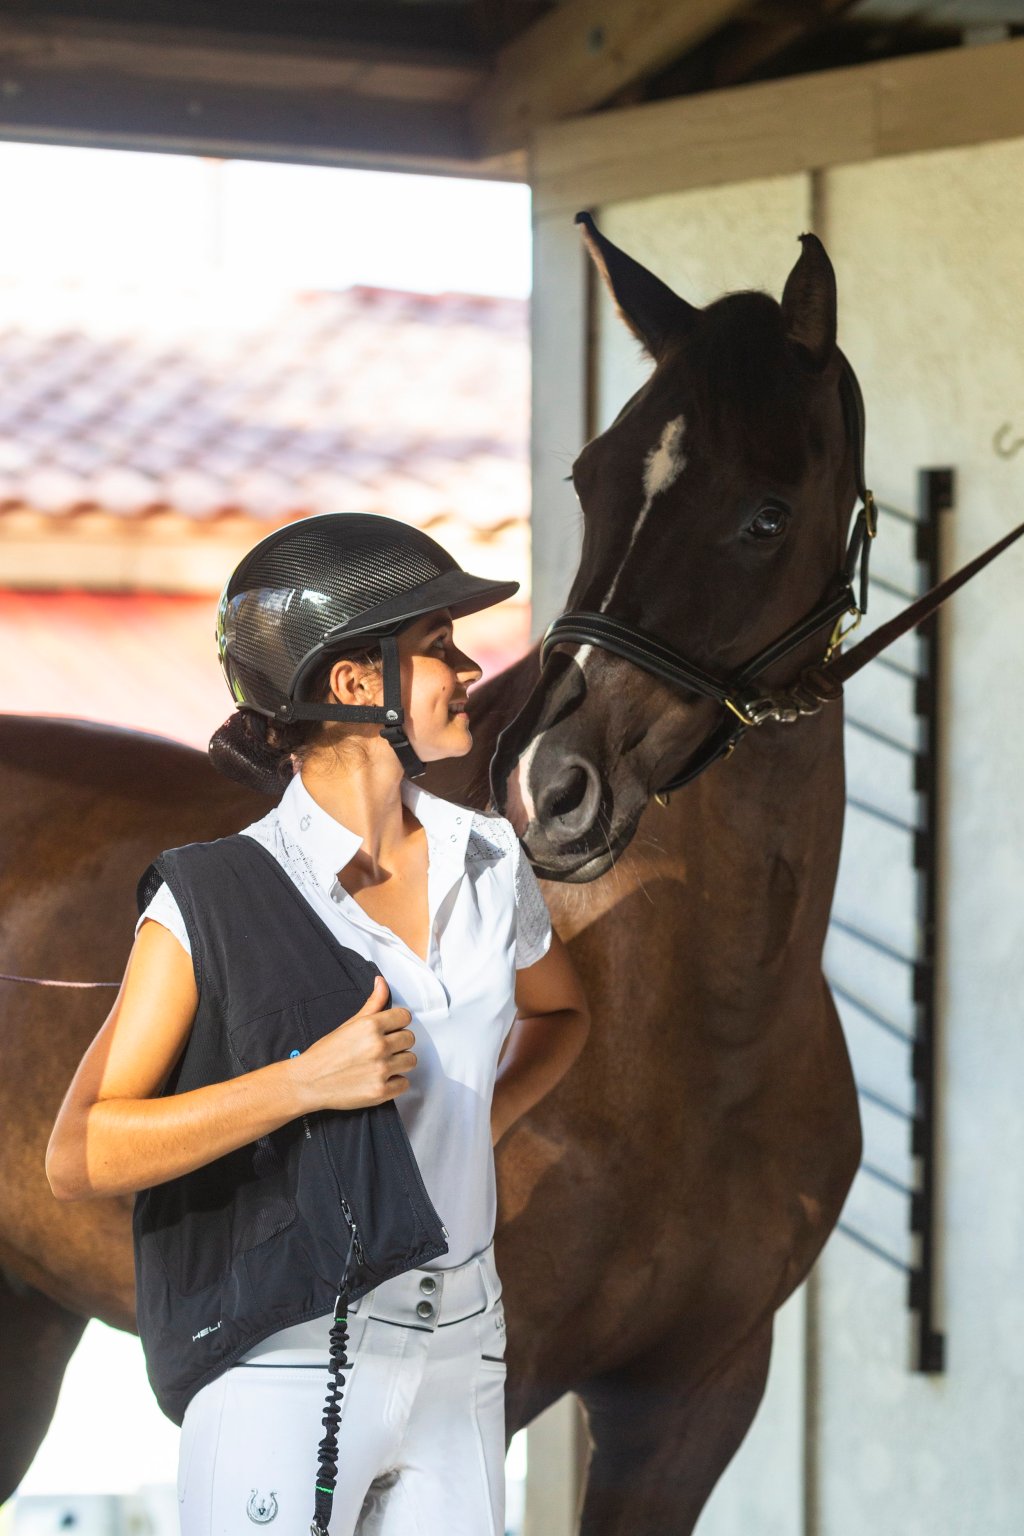 Equestrian Air Vests: Should You Wear One?